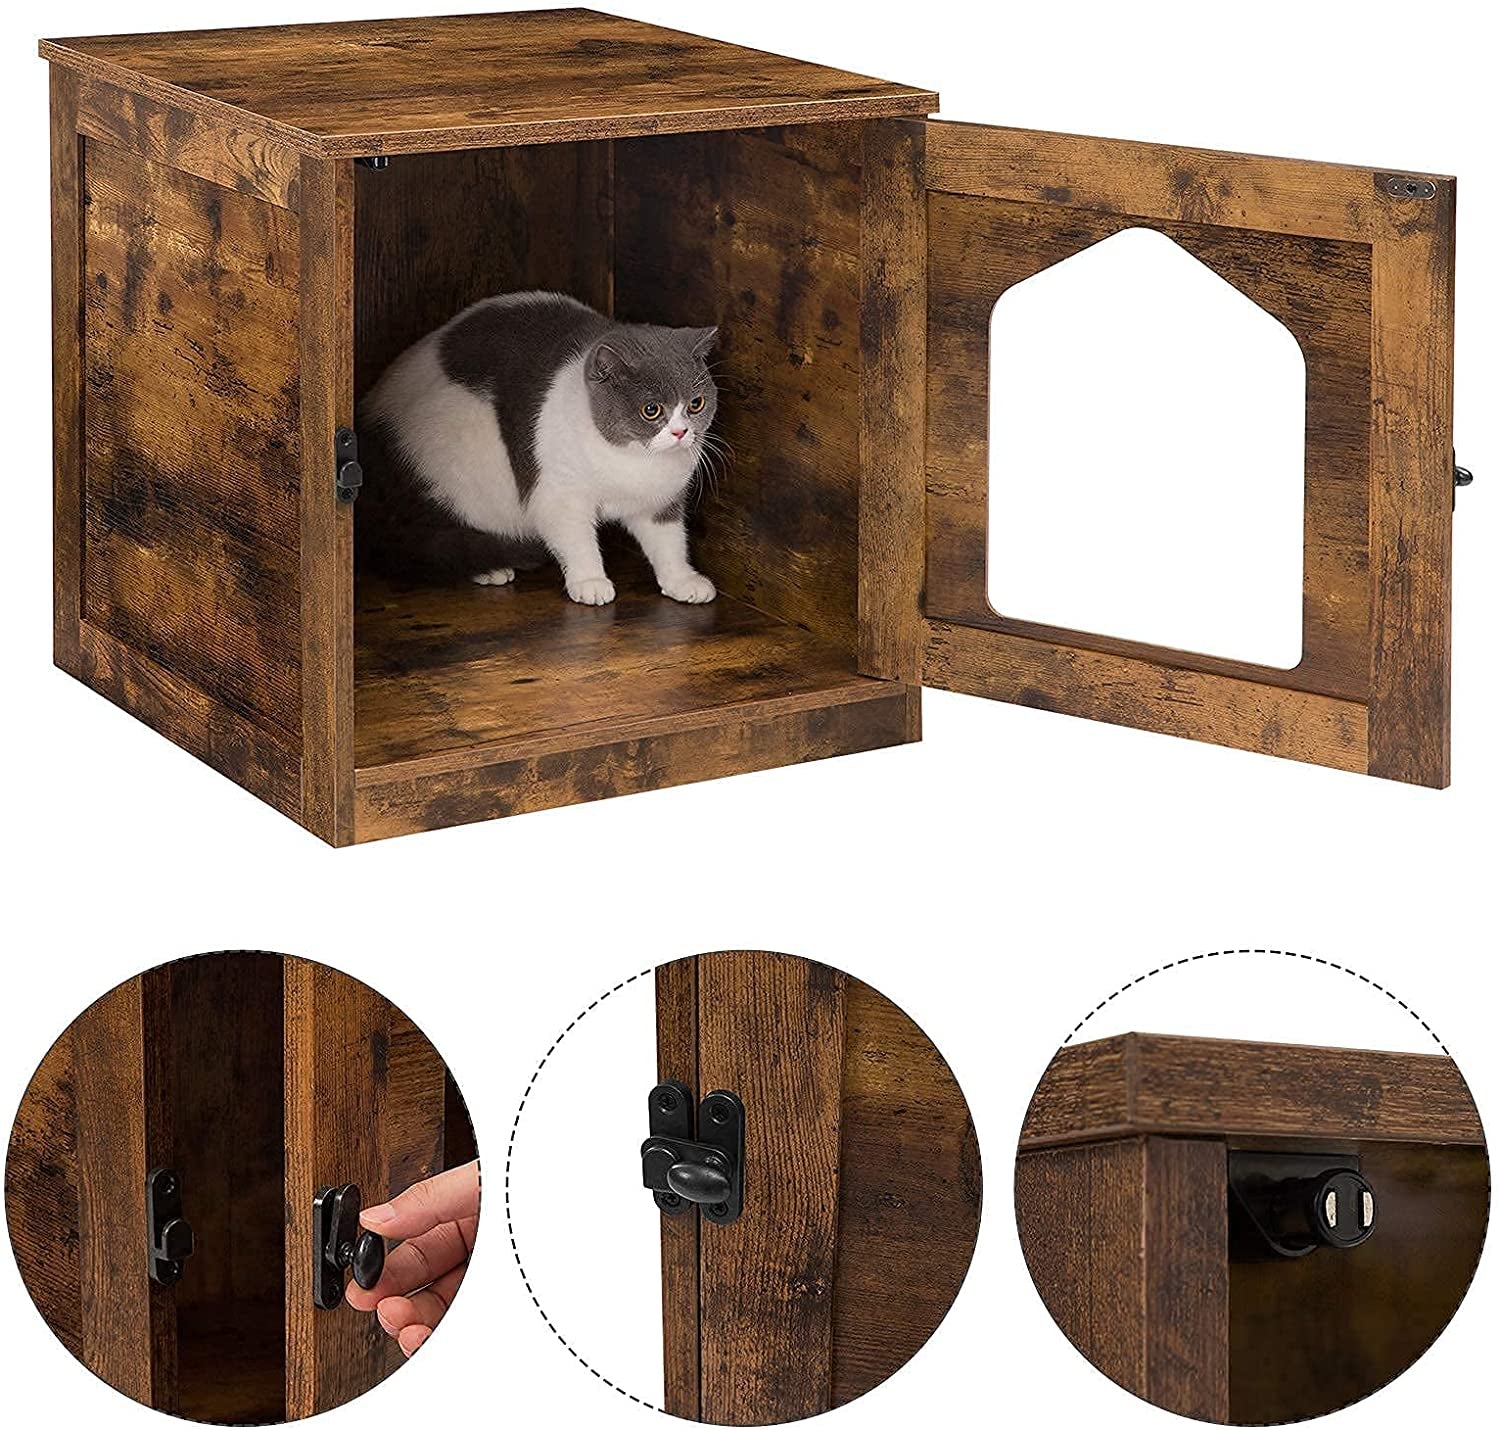 MZDXJ Cat Litter Box Enclosure, Hidden Litter Box Furniture, Enclosed Cat House Side Table, Cat Washroom with Door, Enlarged Cat Litter Cabinet for Fat Orange Cat, Nightstand, Rustic Brown BF01MW01